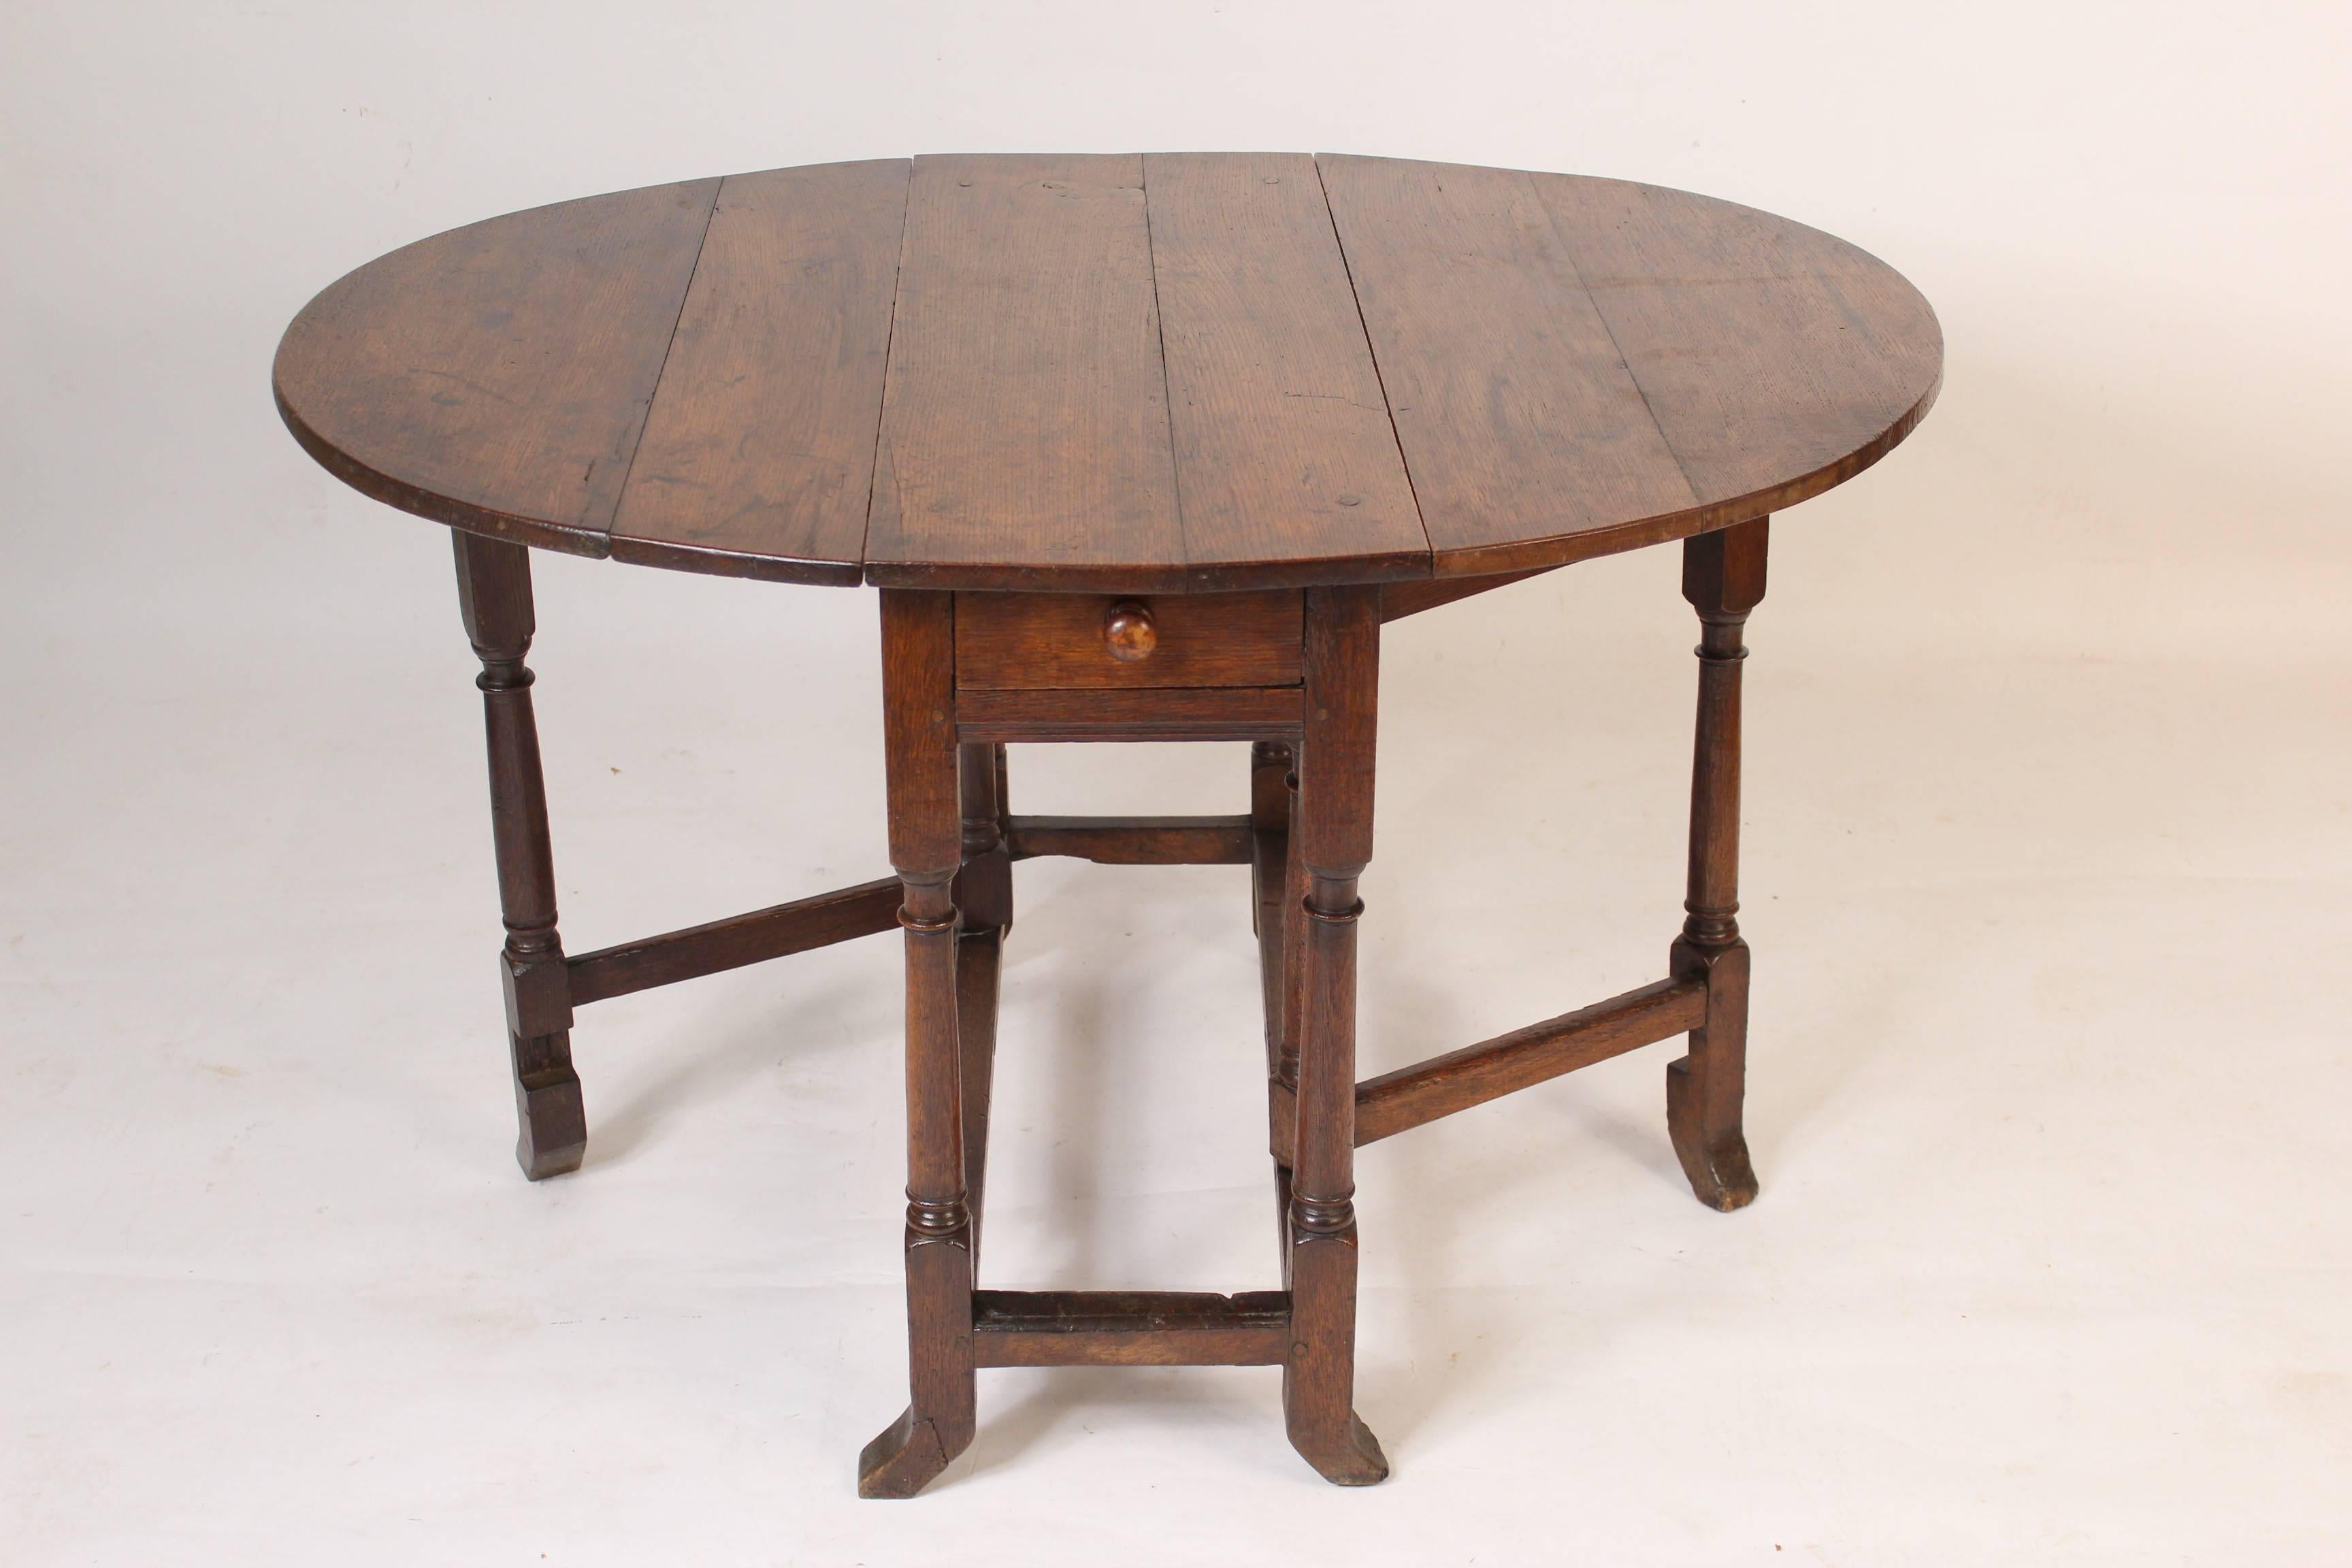 Antique English oak gate table, 19th century. This table has excellent old color, pegged construction and hand dove tailed drawers. The measurements of the top when the drop leafs are up, width 44